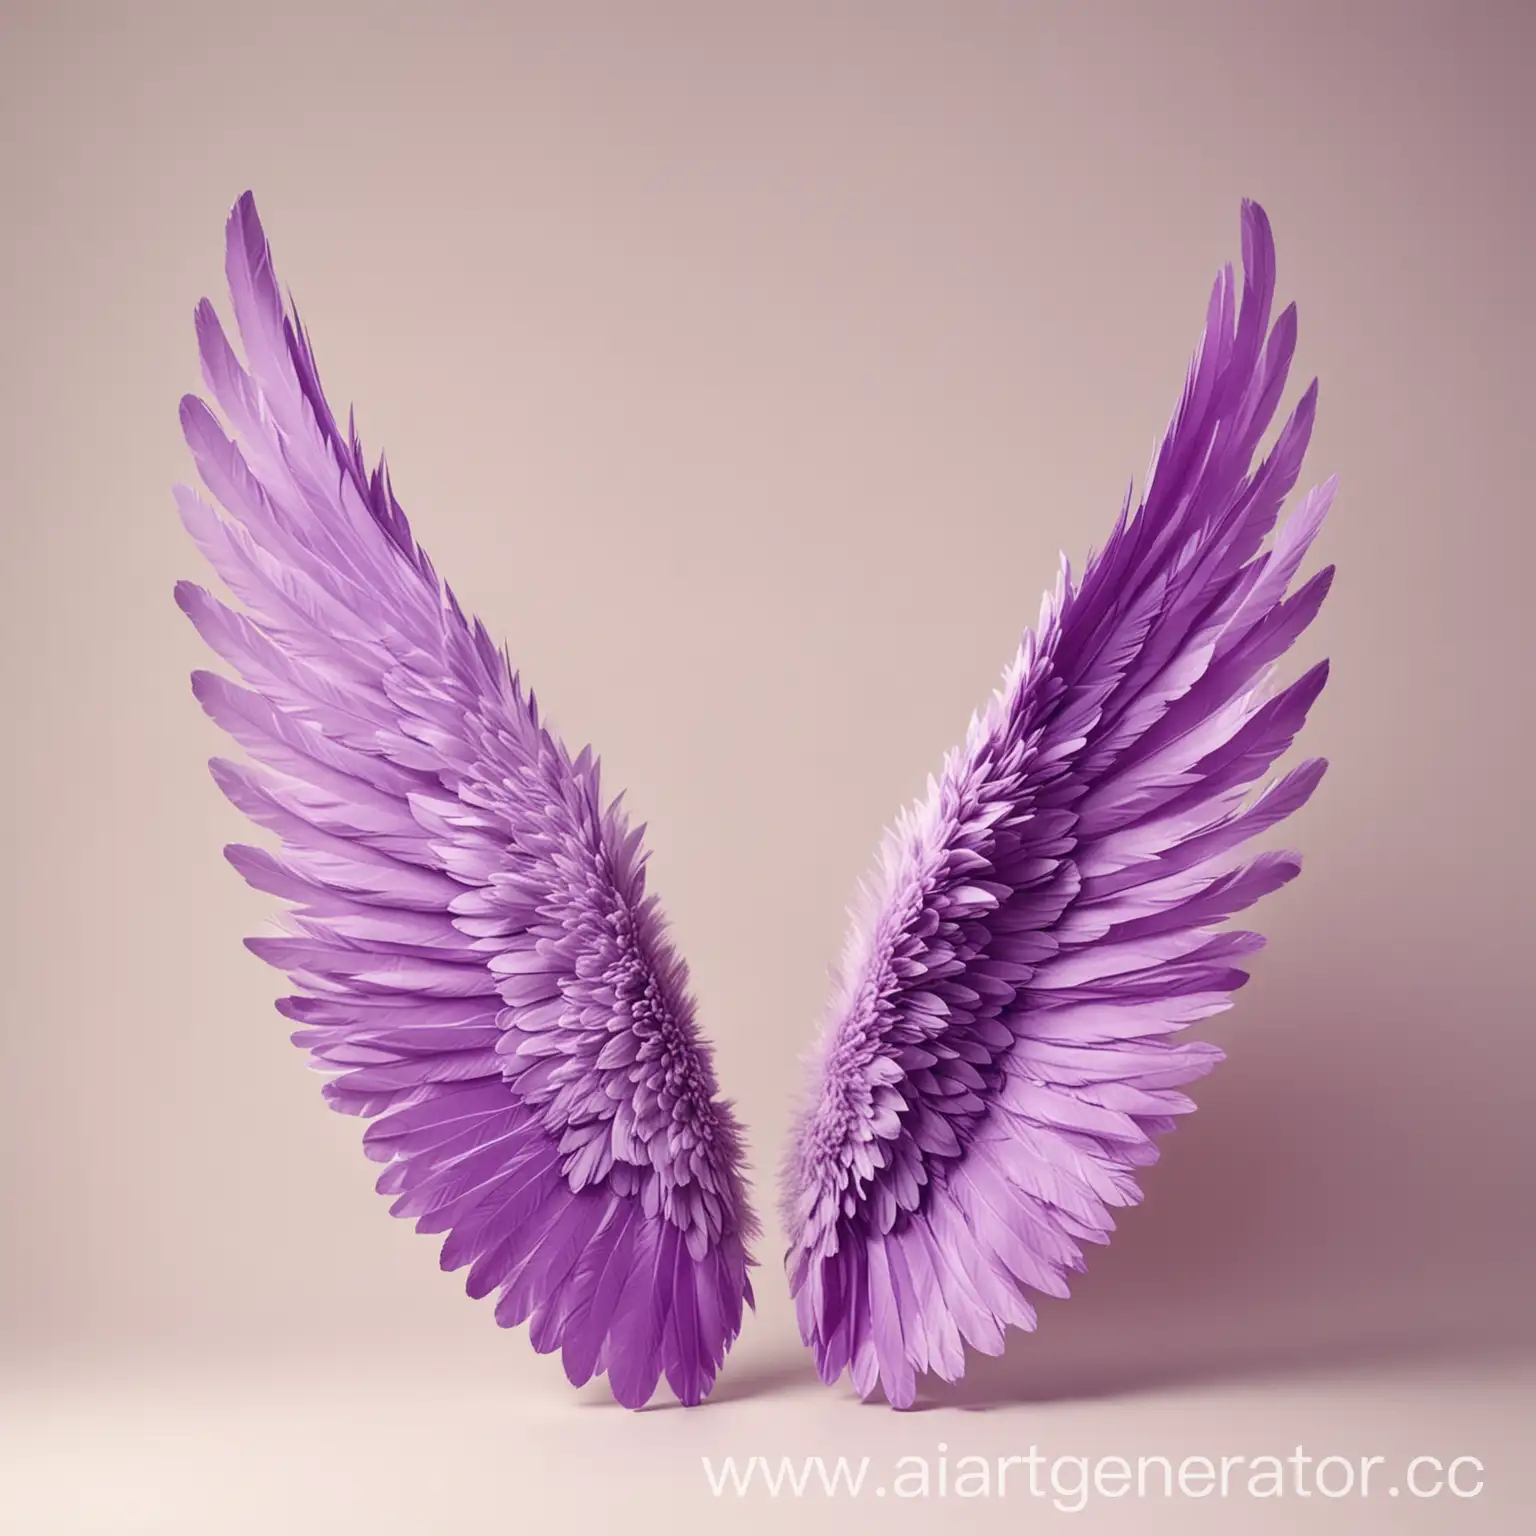 Graceful-Angel-with-Purple-Wings-on-Radiant-Background